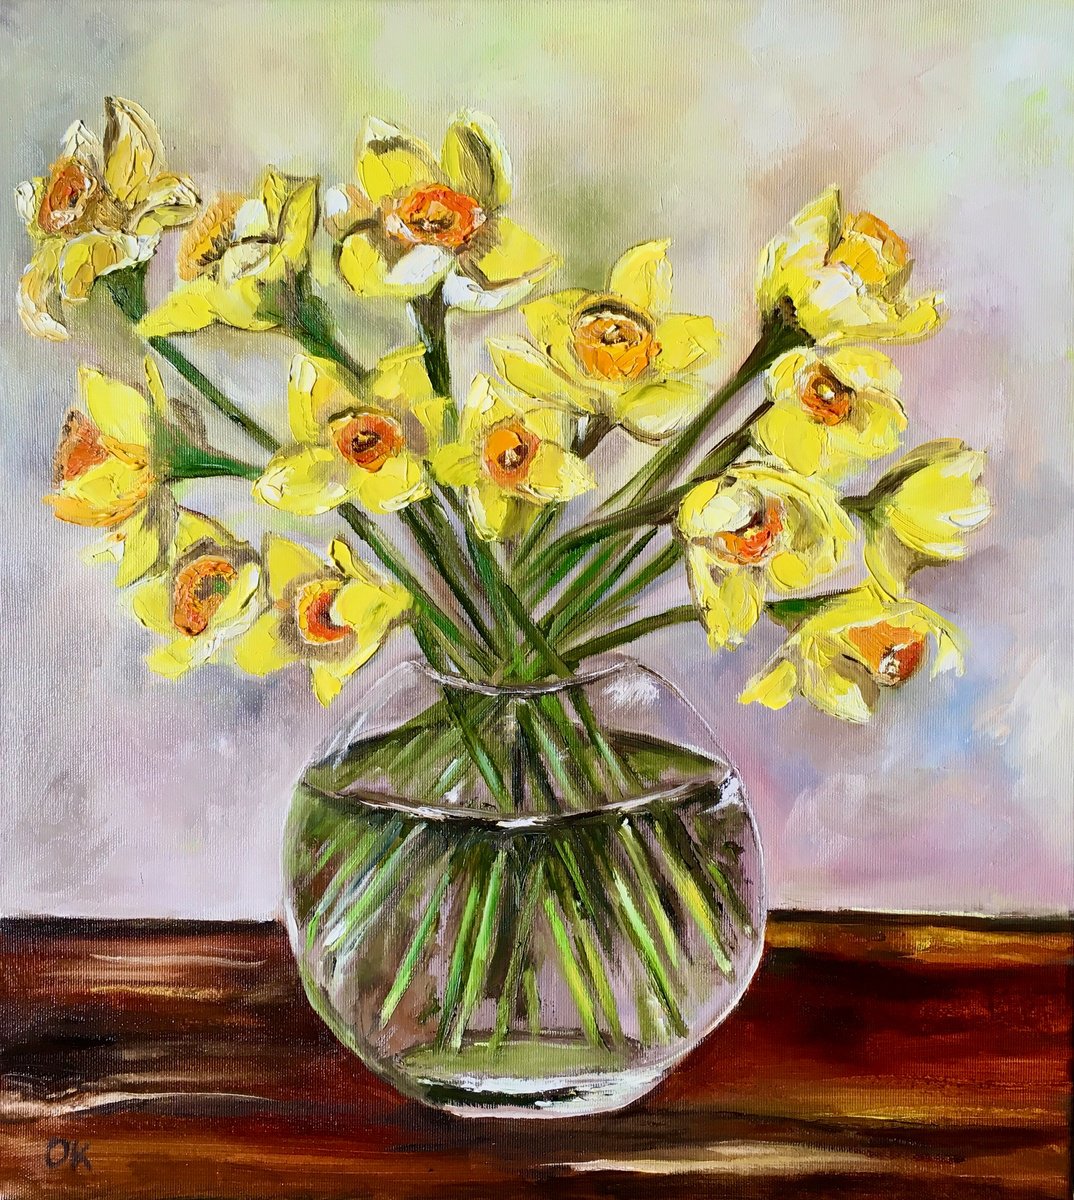 Bouquet of Daffodils #5 on wooden table, still life inspired by spring in a glass. by Olga Koval